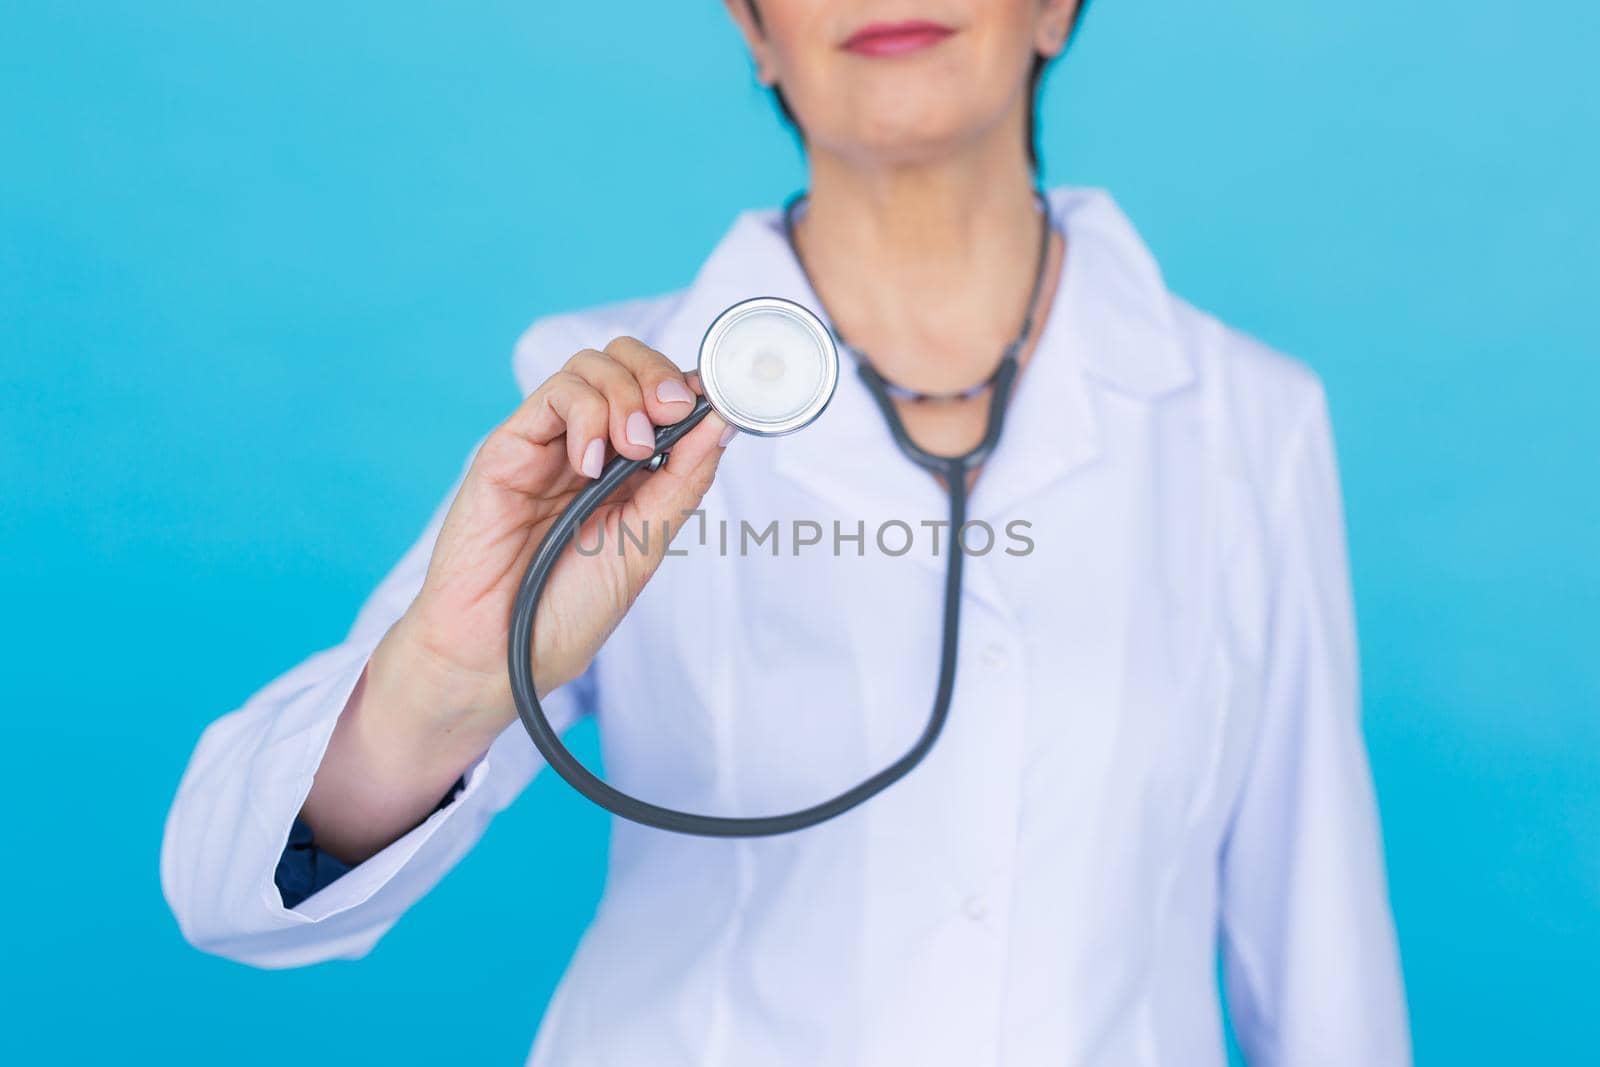 Doctor with stethoscope, close up over blue background.